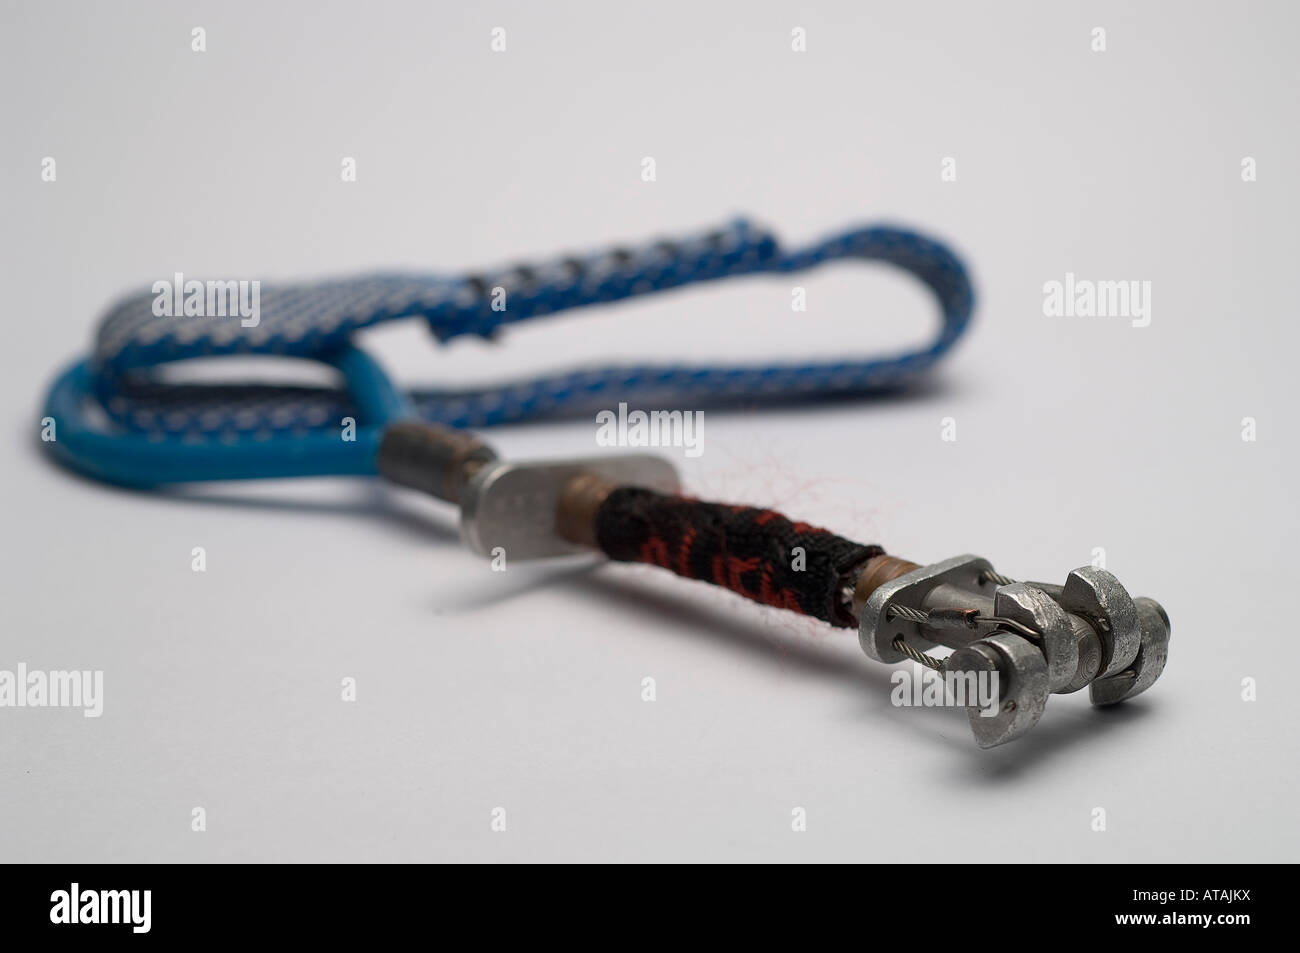 camming device used in rock climbing for protection during a fall Stock Photo